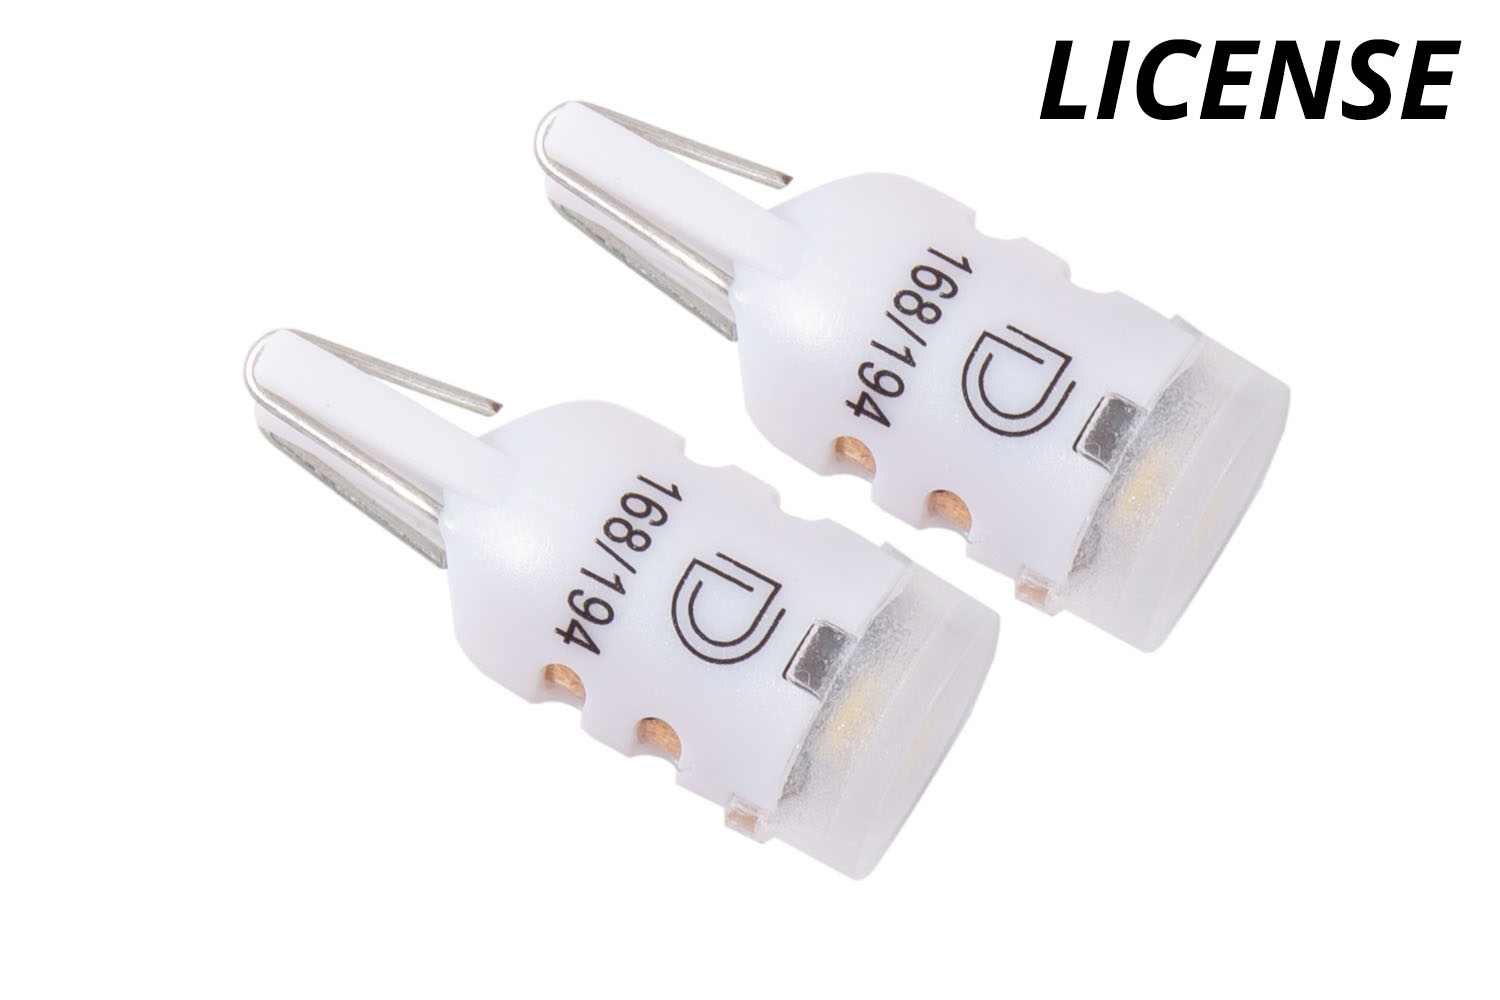 https://www.diodedynamics.com/media/catalog/product/d/d/dd0028p_194_hp5_natural_white_pair_license_titled_15.jpg